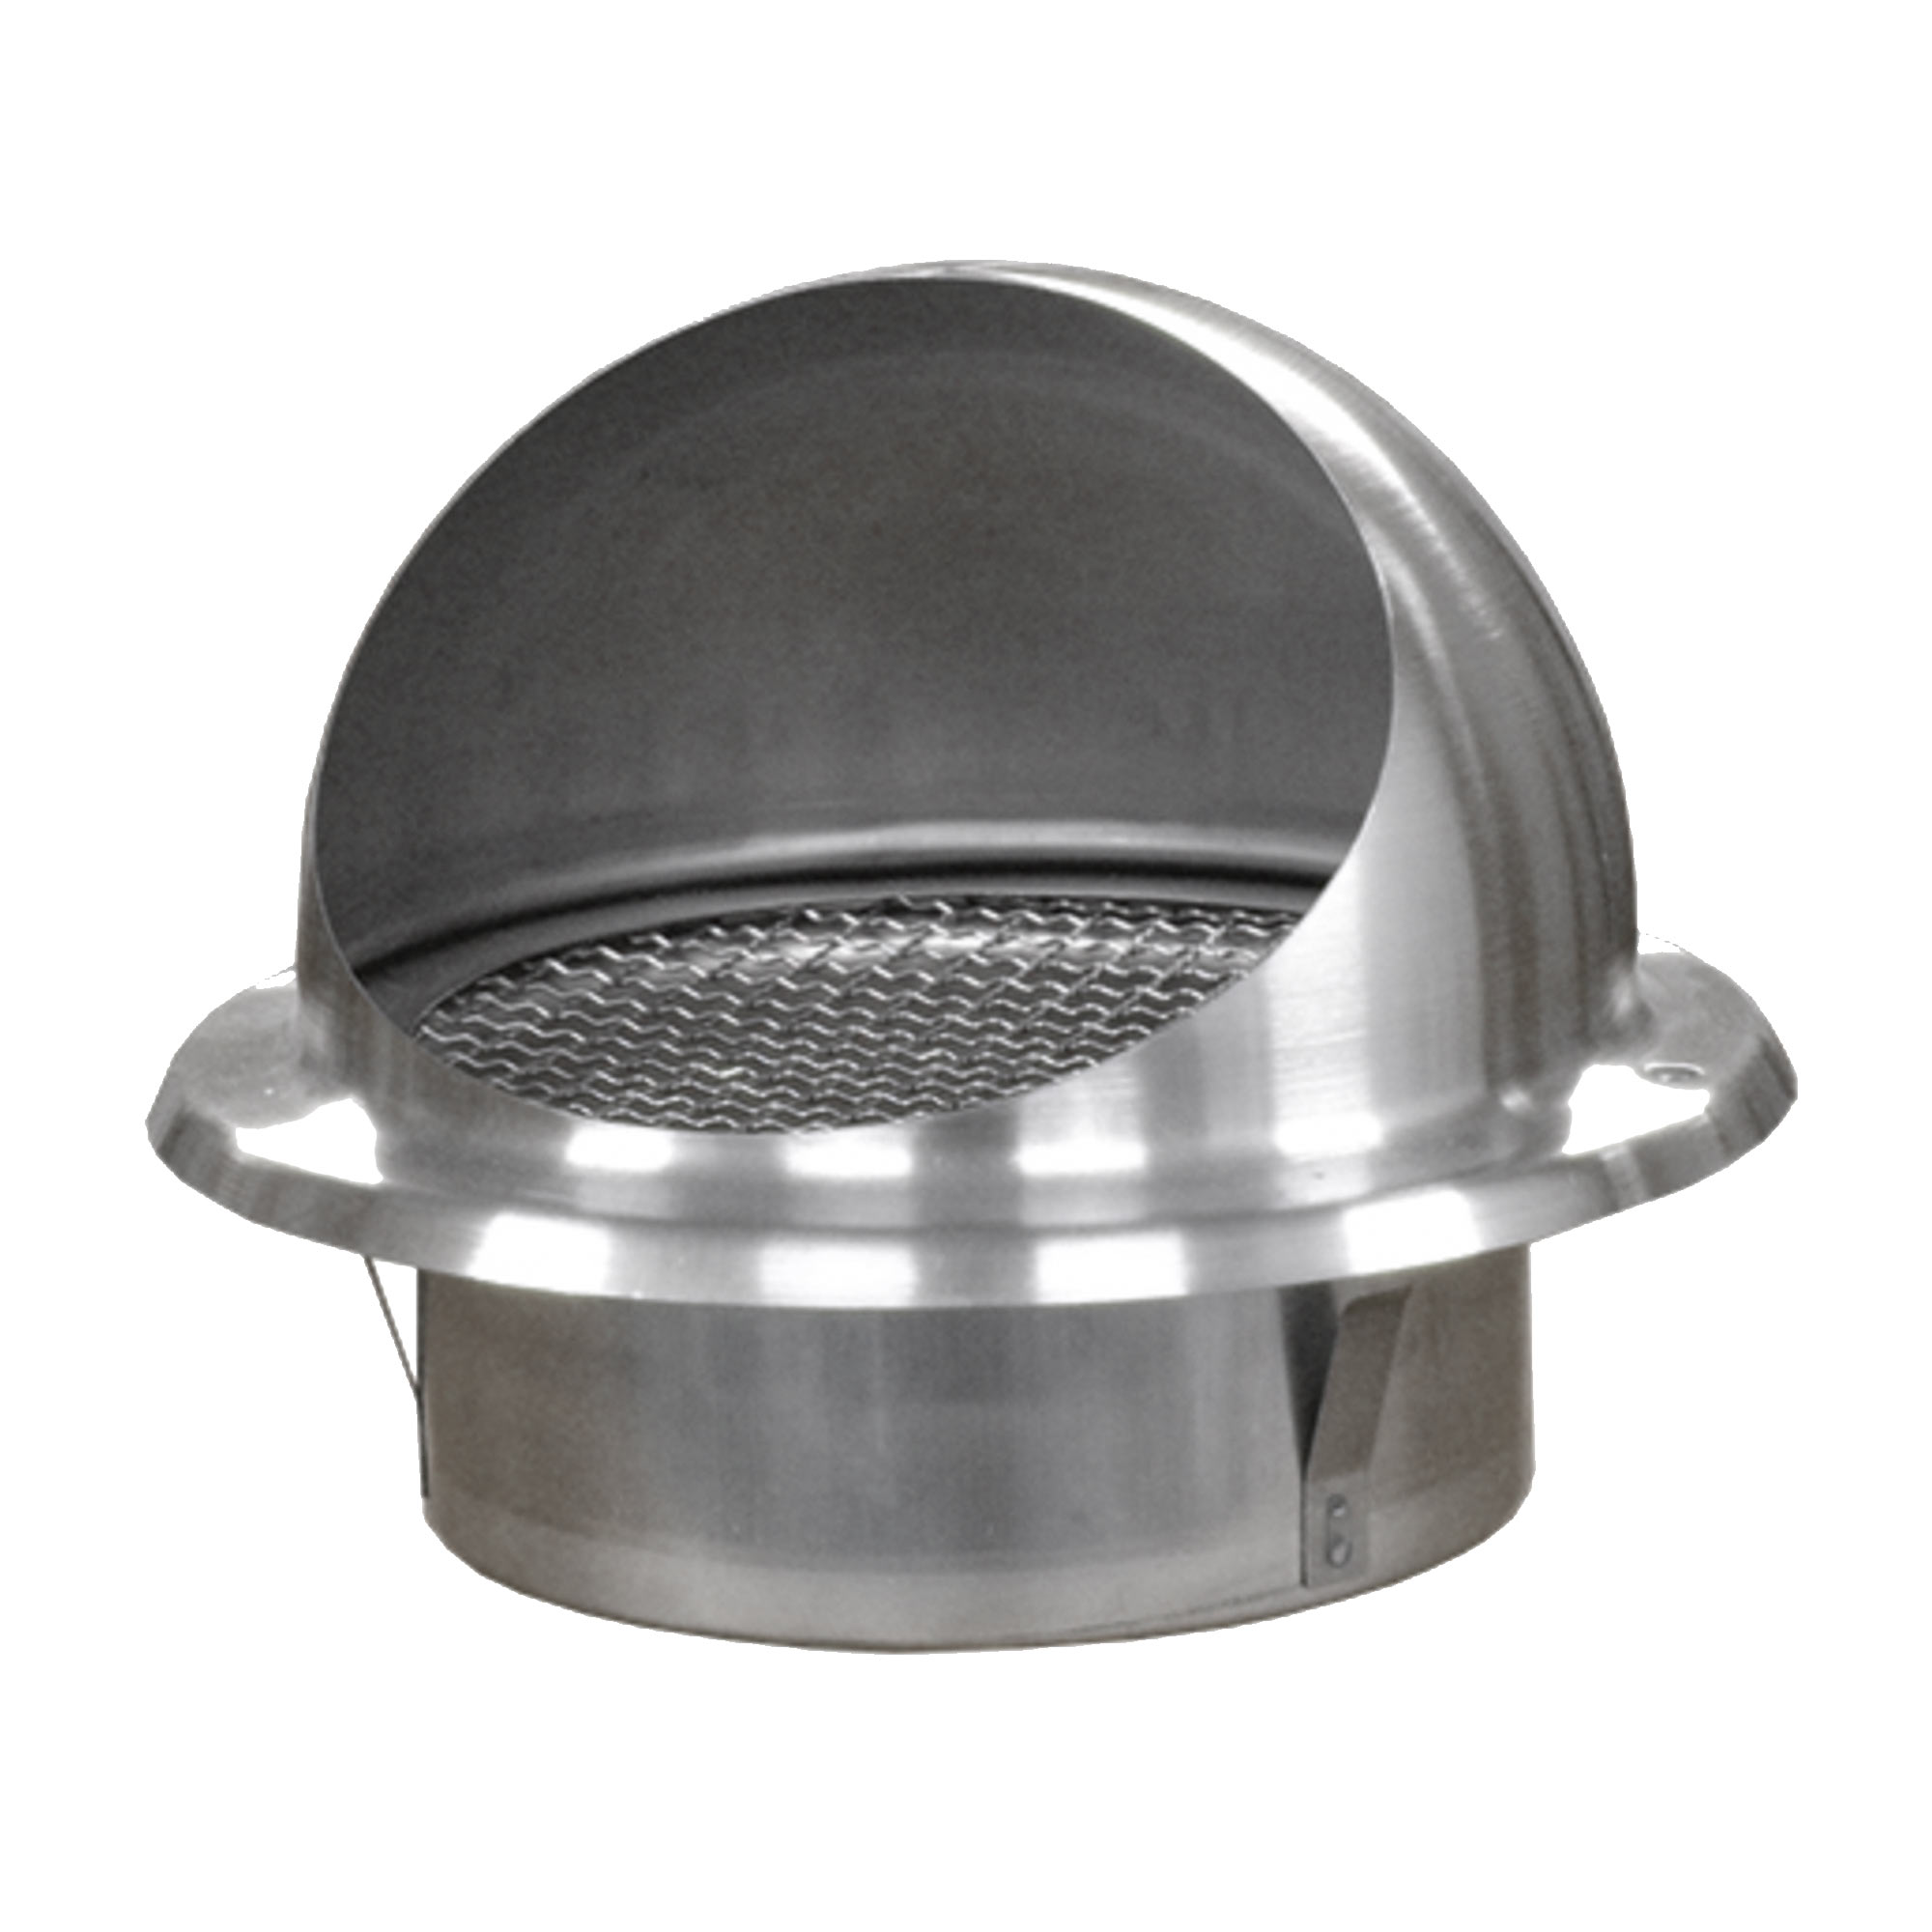 Masons Dome Cowl Vent, Stainless Steel